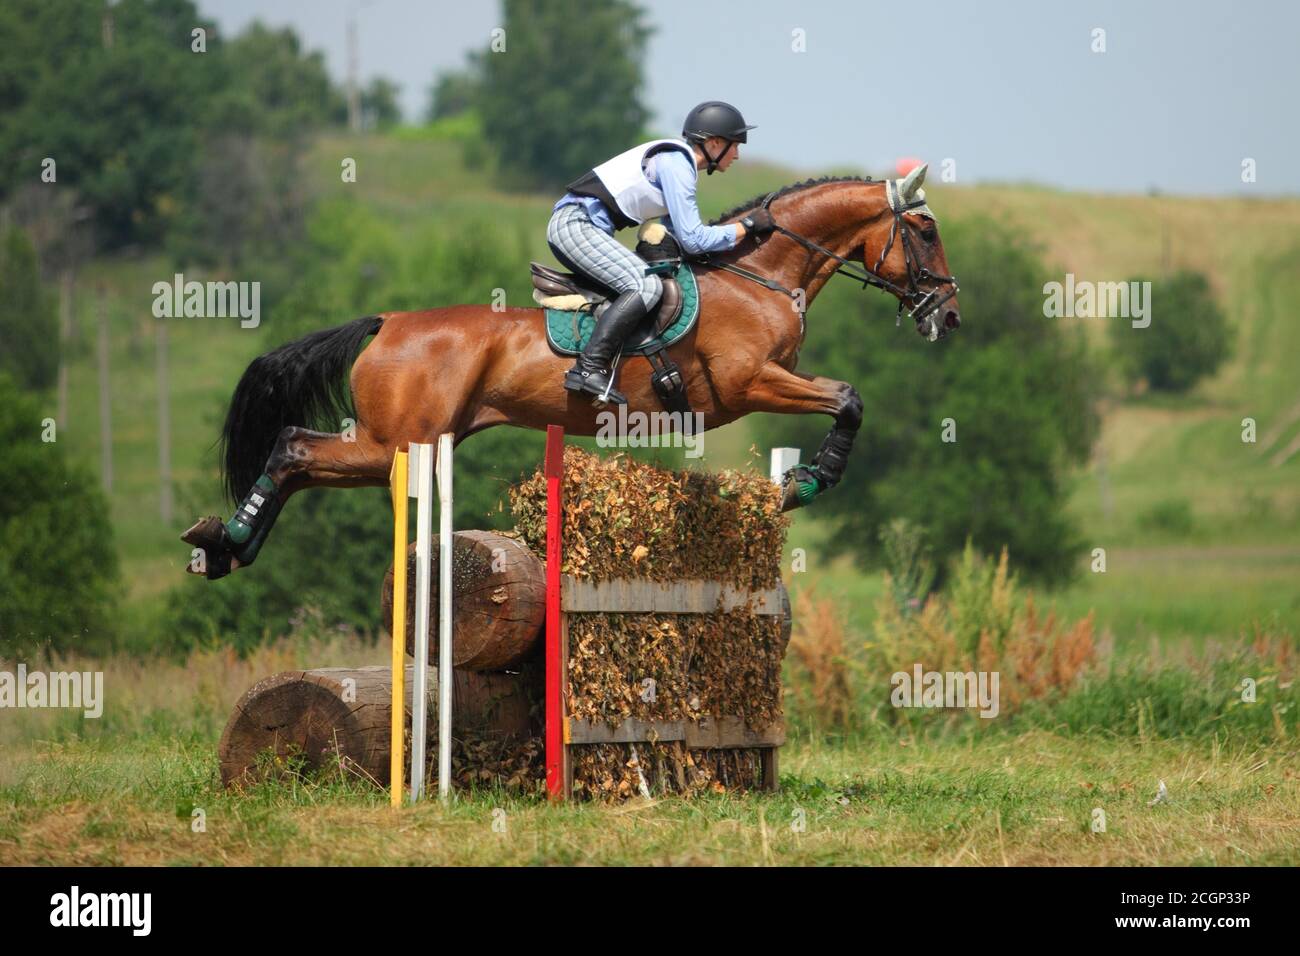 Sports horse and teen rider sailing over a jump at an outdoor equestrian competition Stock Photo